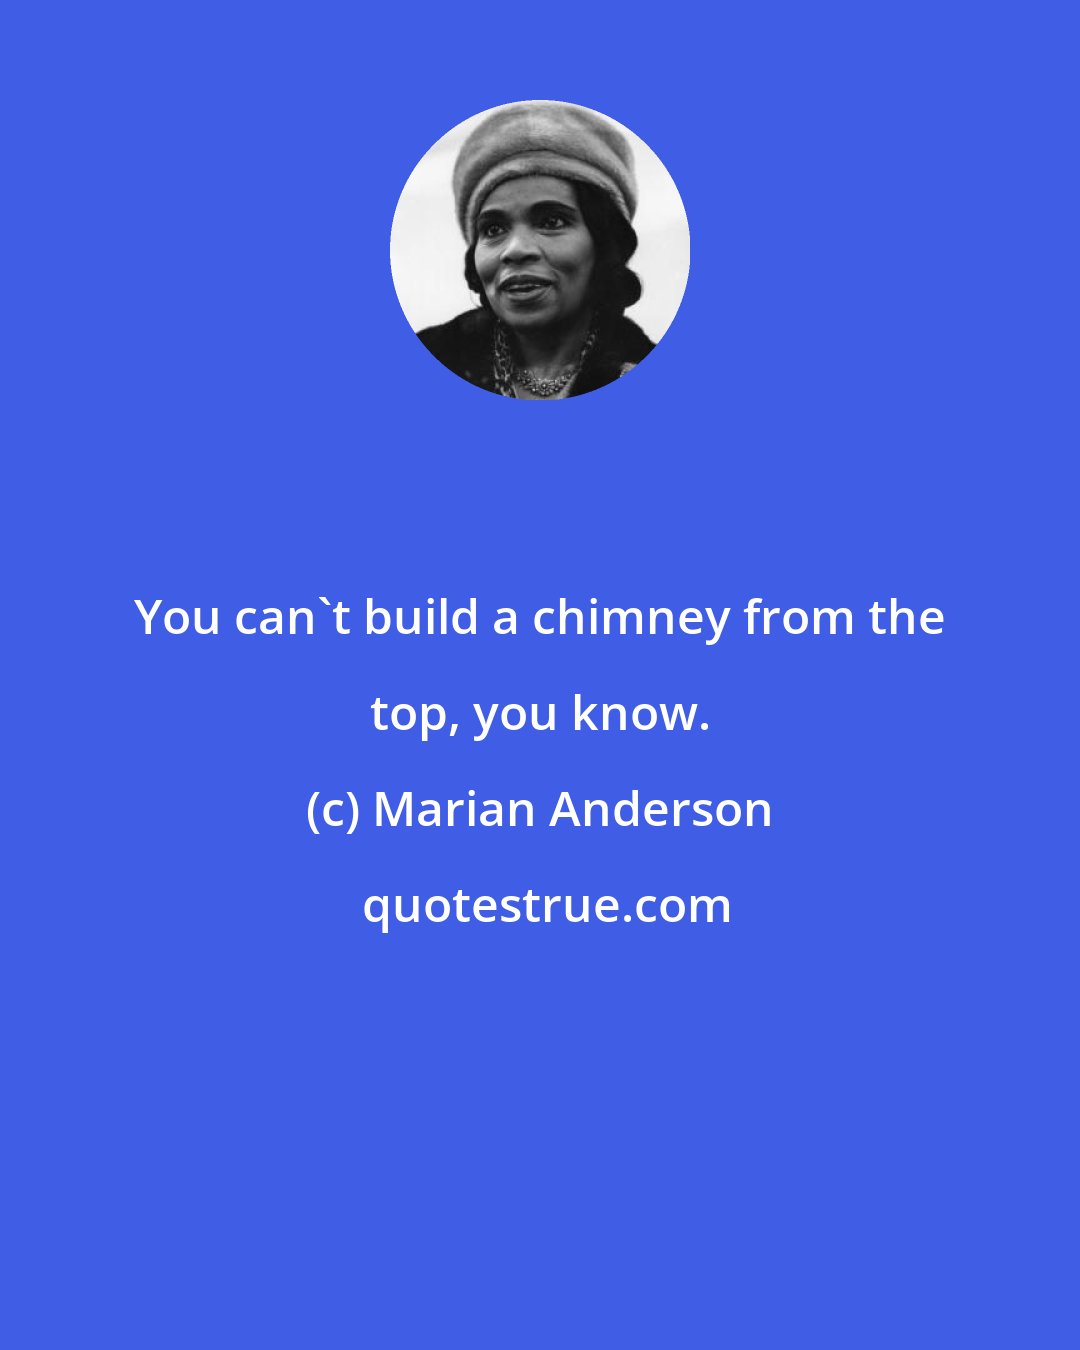 Marian Anderson: You can't build a chimney from the top, you know.